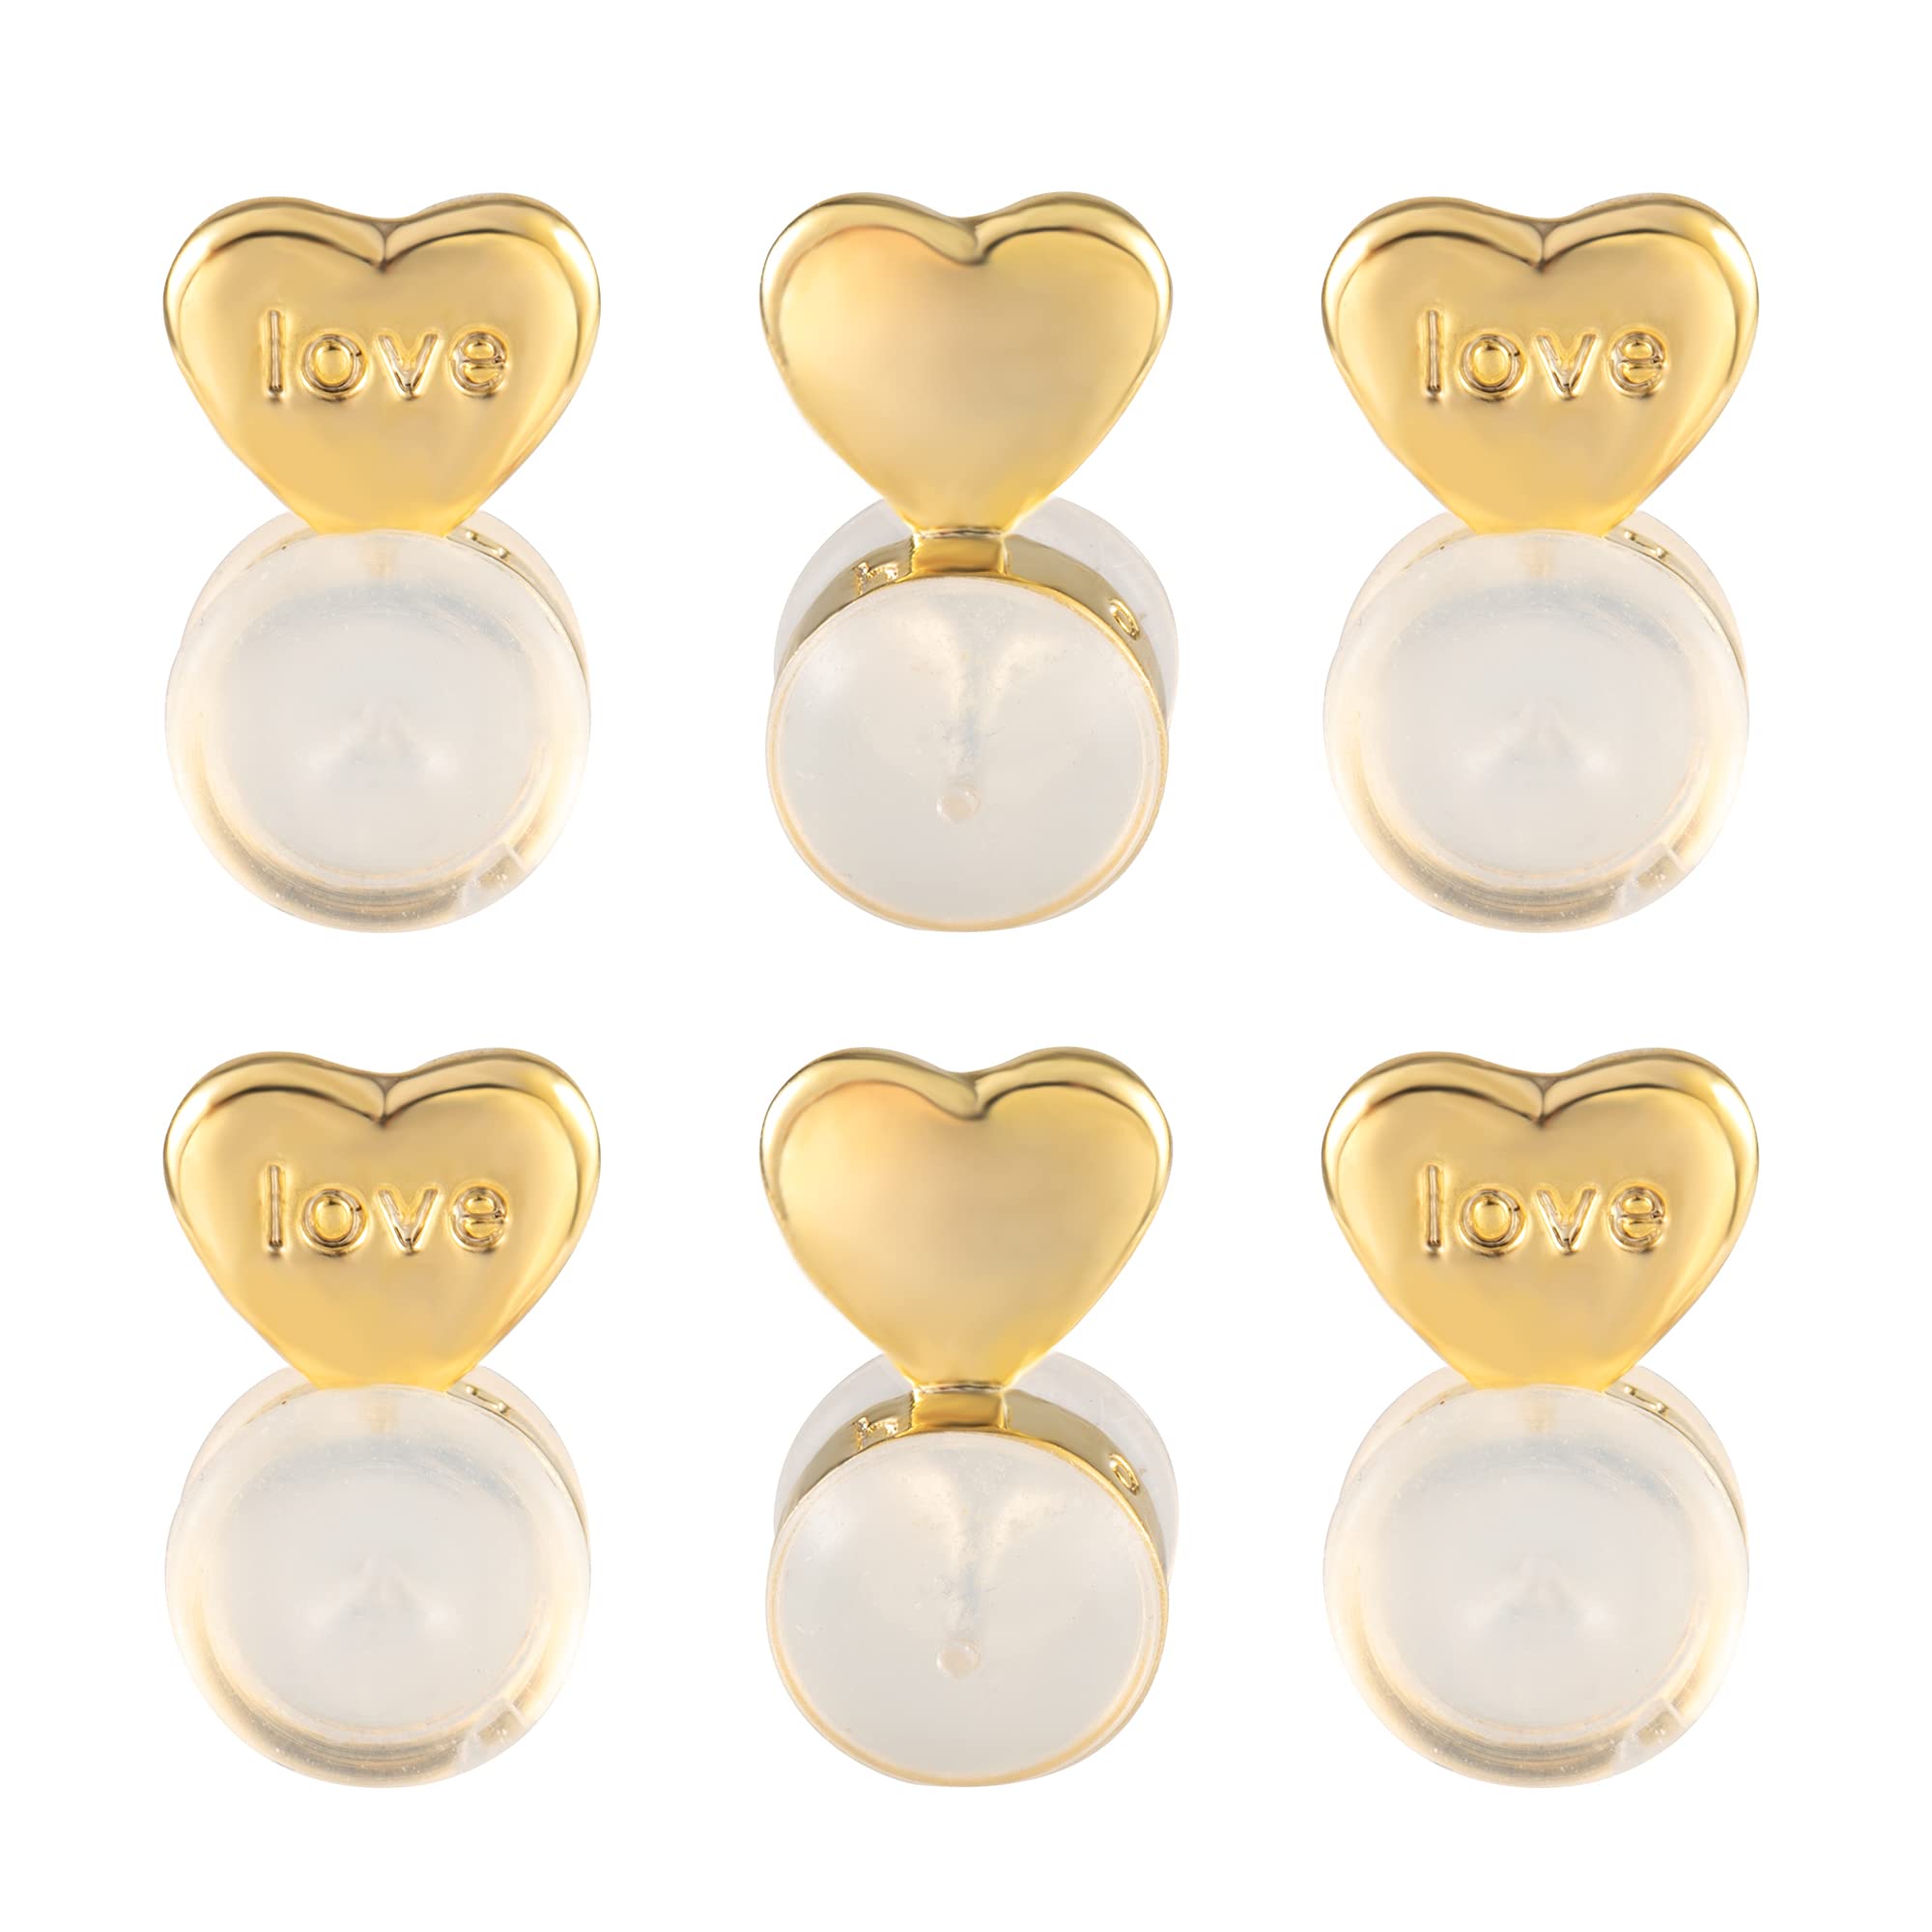 6PCS Heart Silicone Earring Lifter, 14K Gold Plated Love Earring Backs for  Studs/Droopy Ears, Hypoallergenic Secure Earring Backs Replacements for  Heavy Earrings